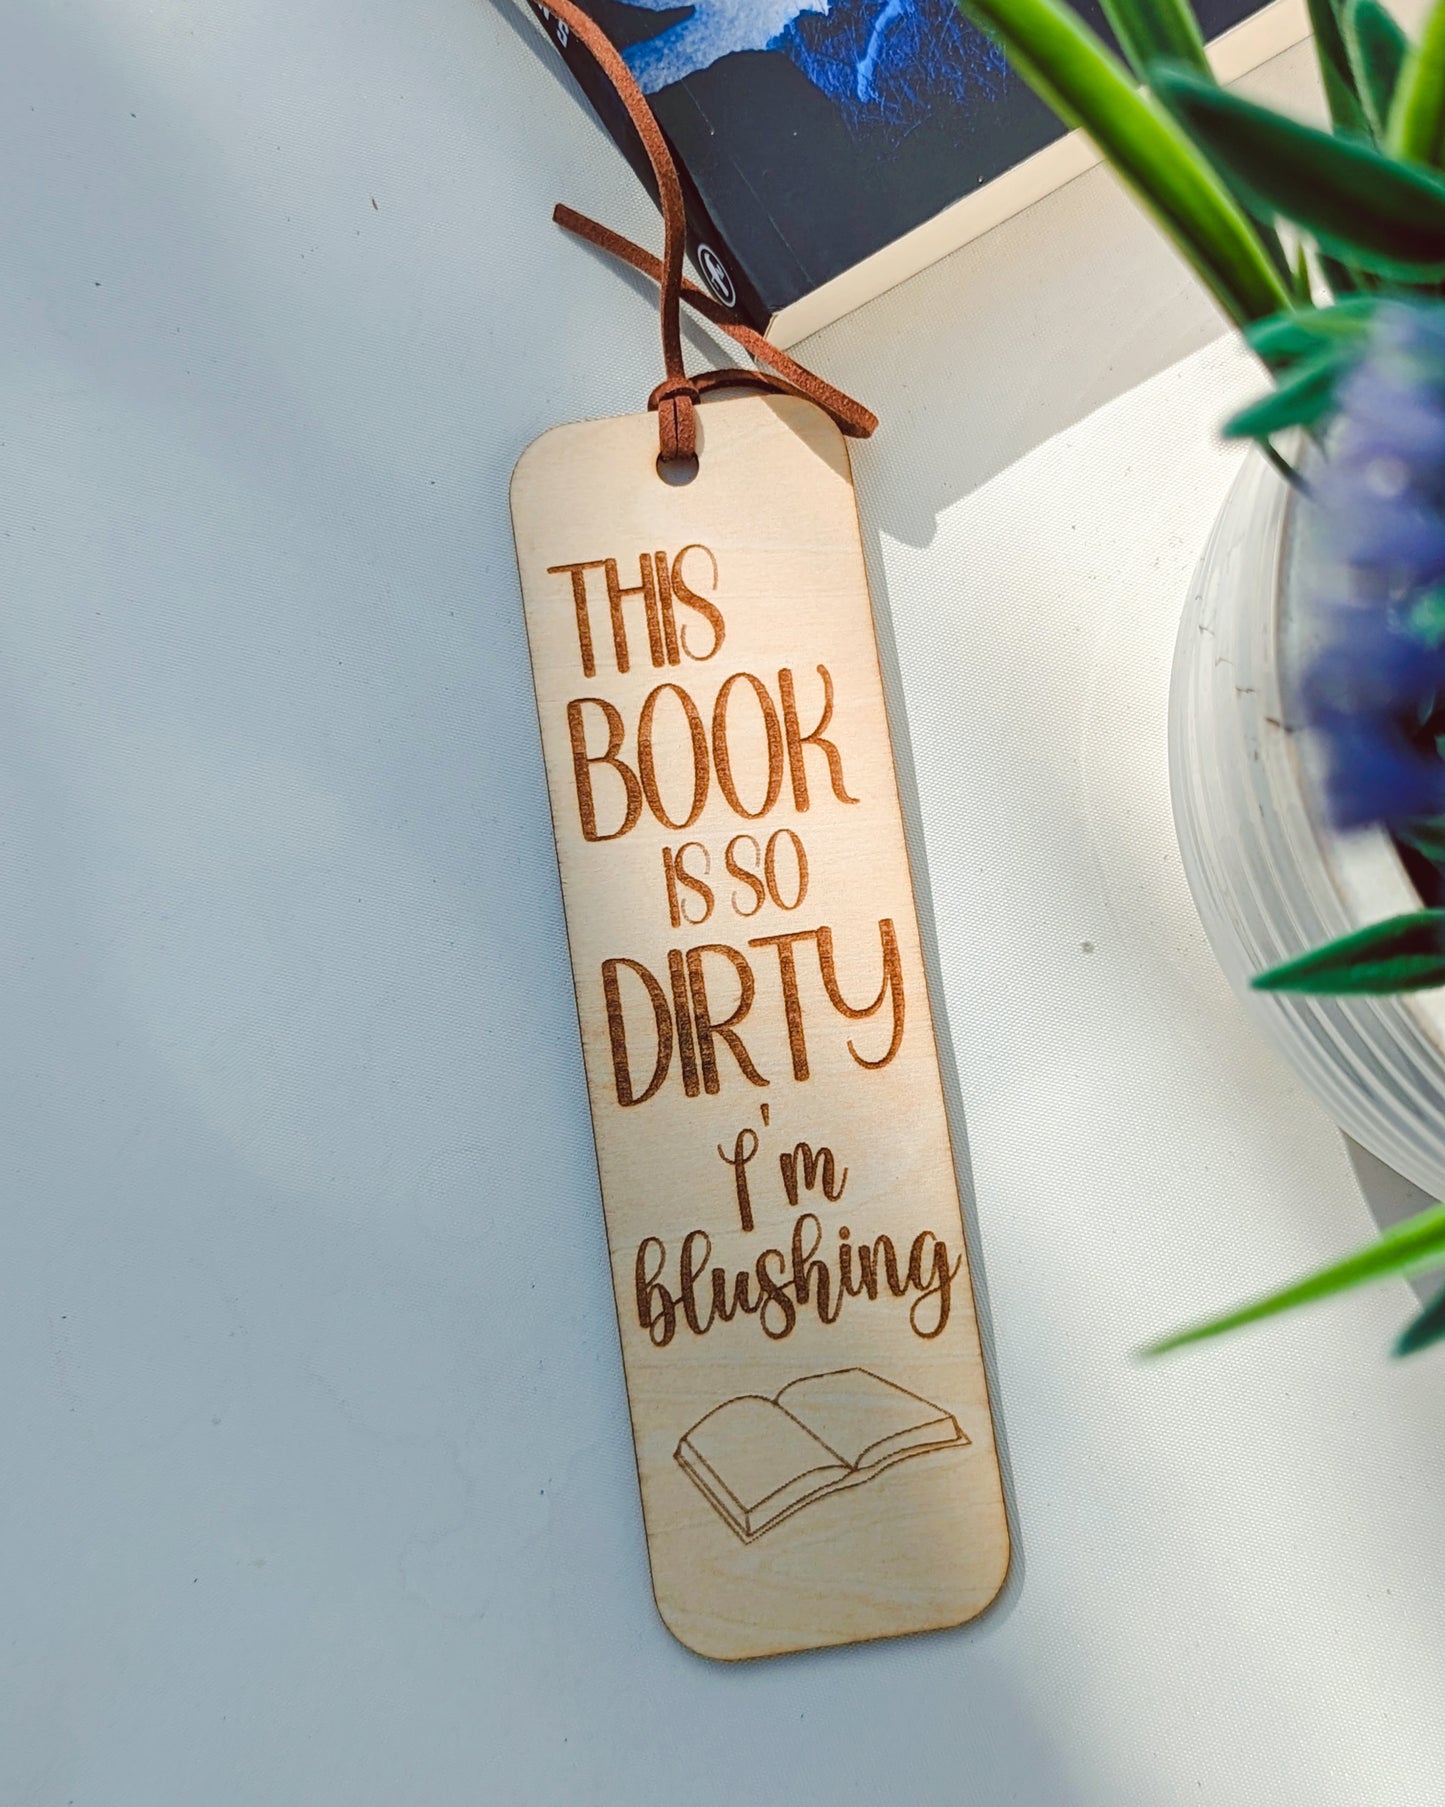 This book is so dirty, I'm blushing - Bookmark